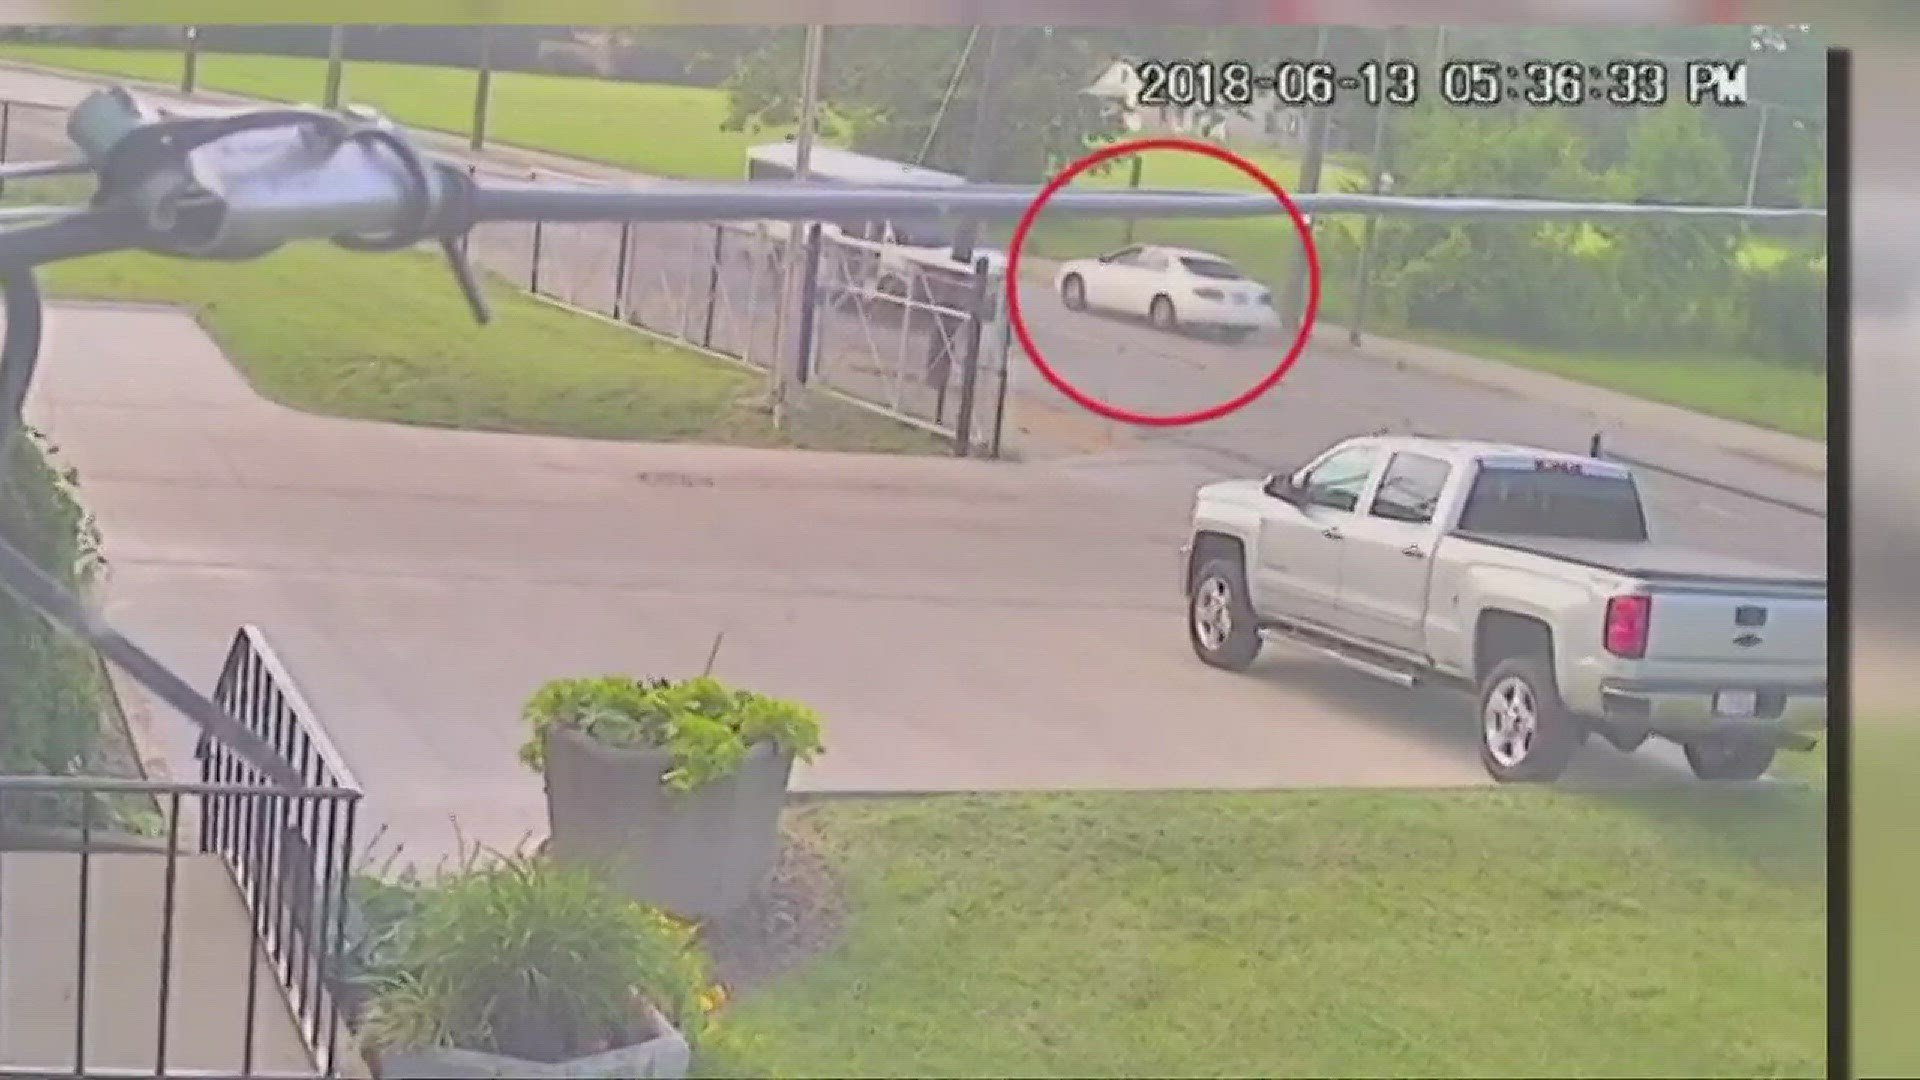 Cleveland police release photos of car that allegedly killed 15-year-old in hit-skip